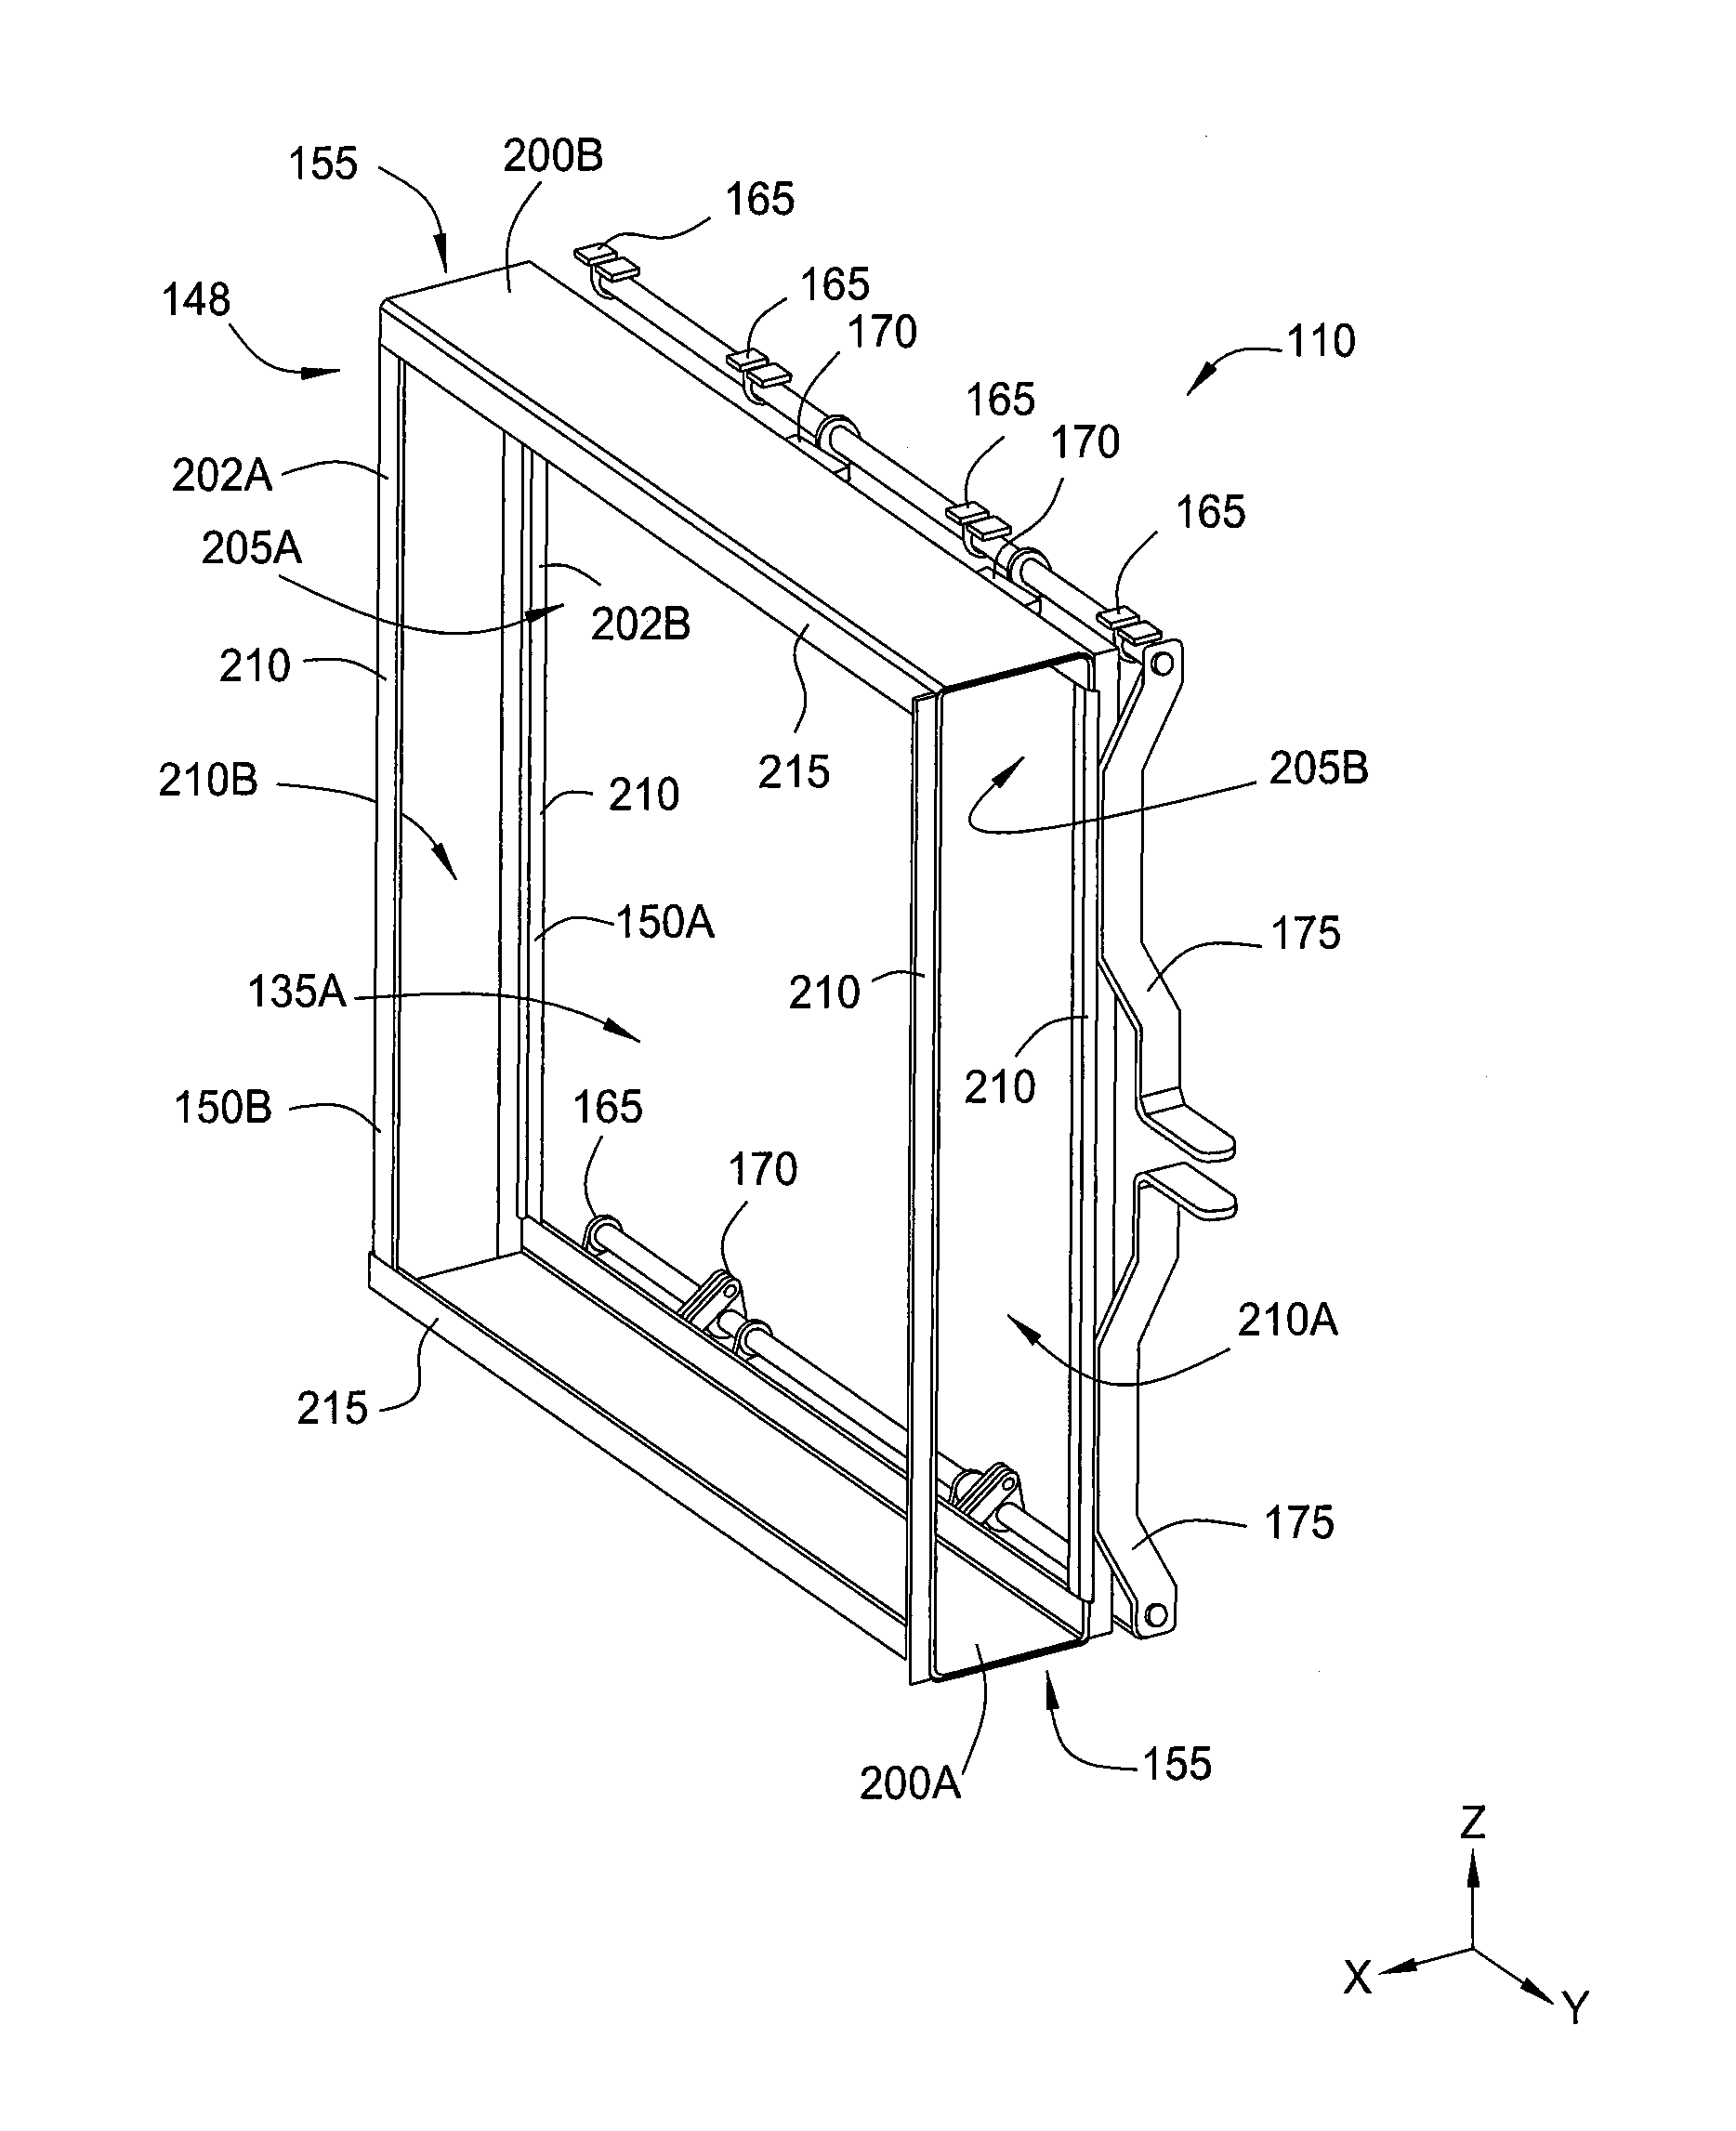 Filter holding frame with adjustable clamping mechanism and slot for pre-filter